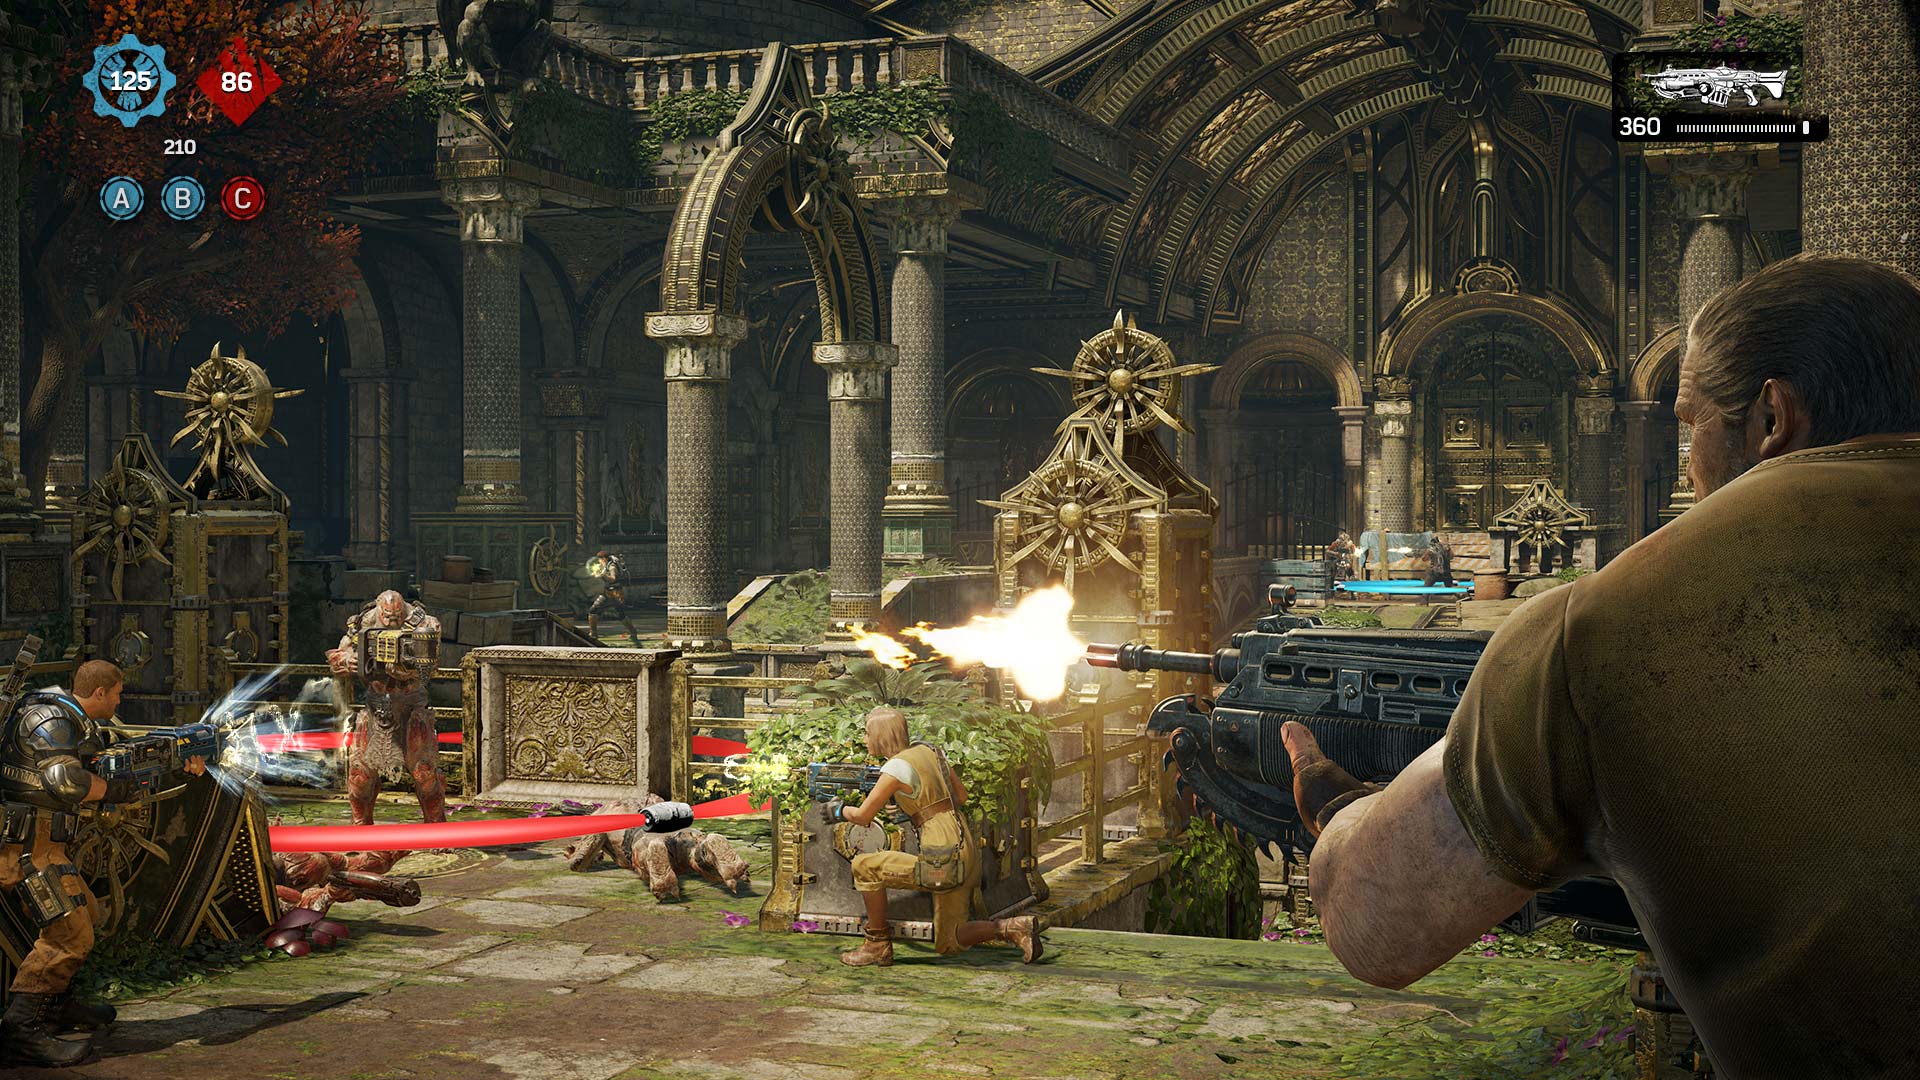 Gears of War is Now the Premier Xbox Franchise